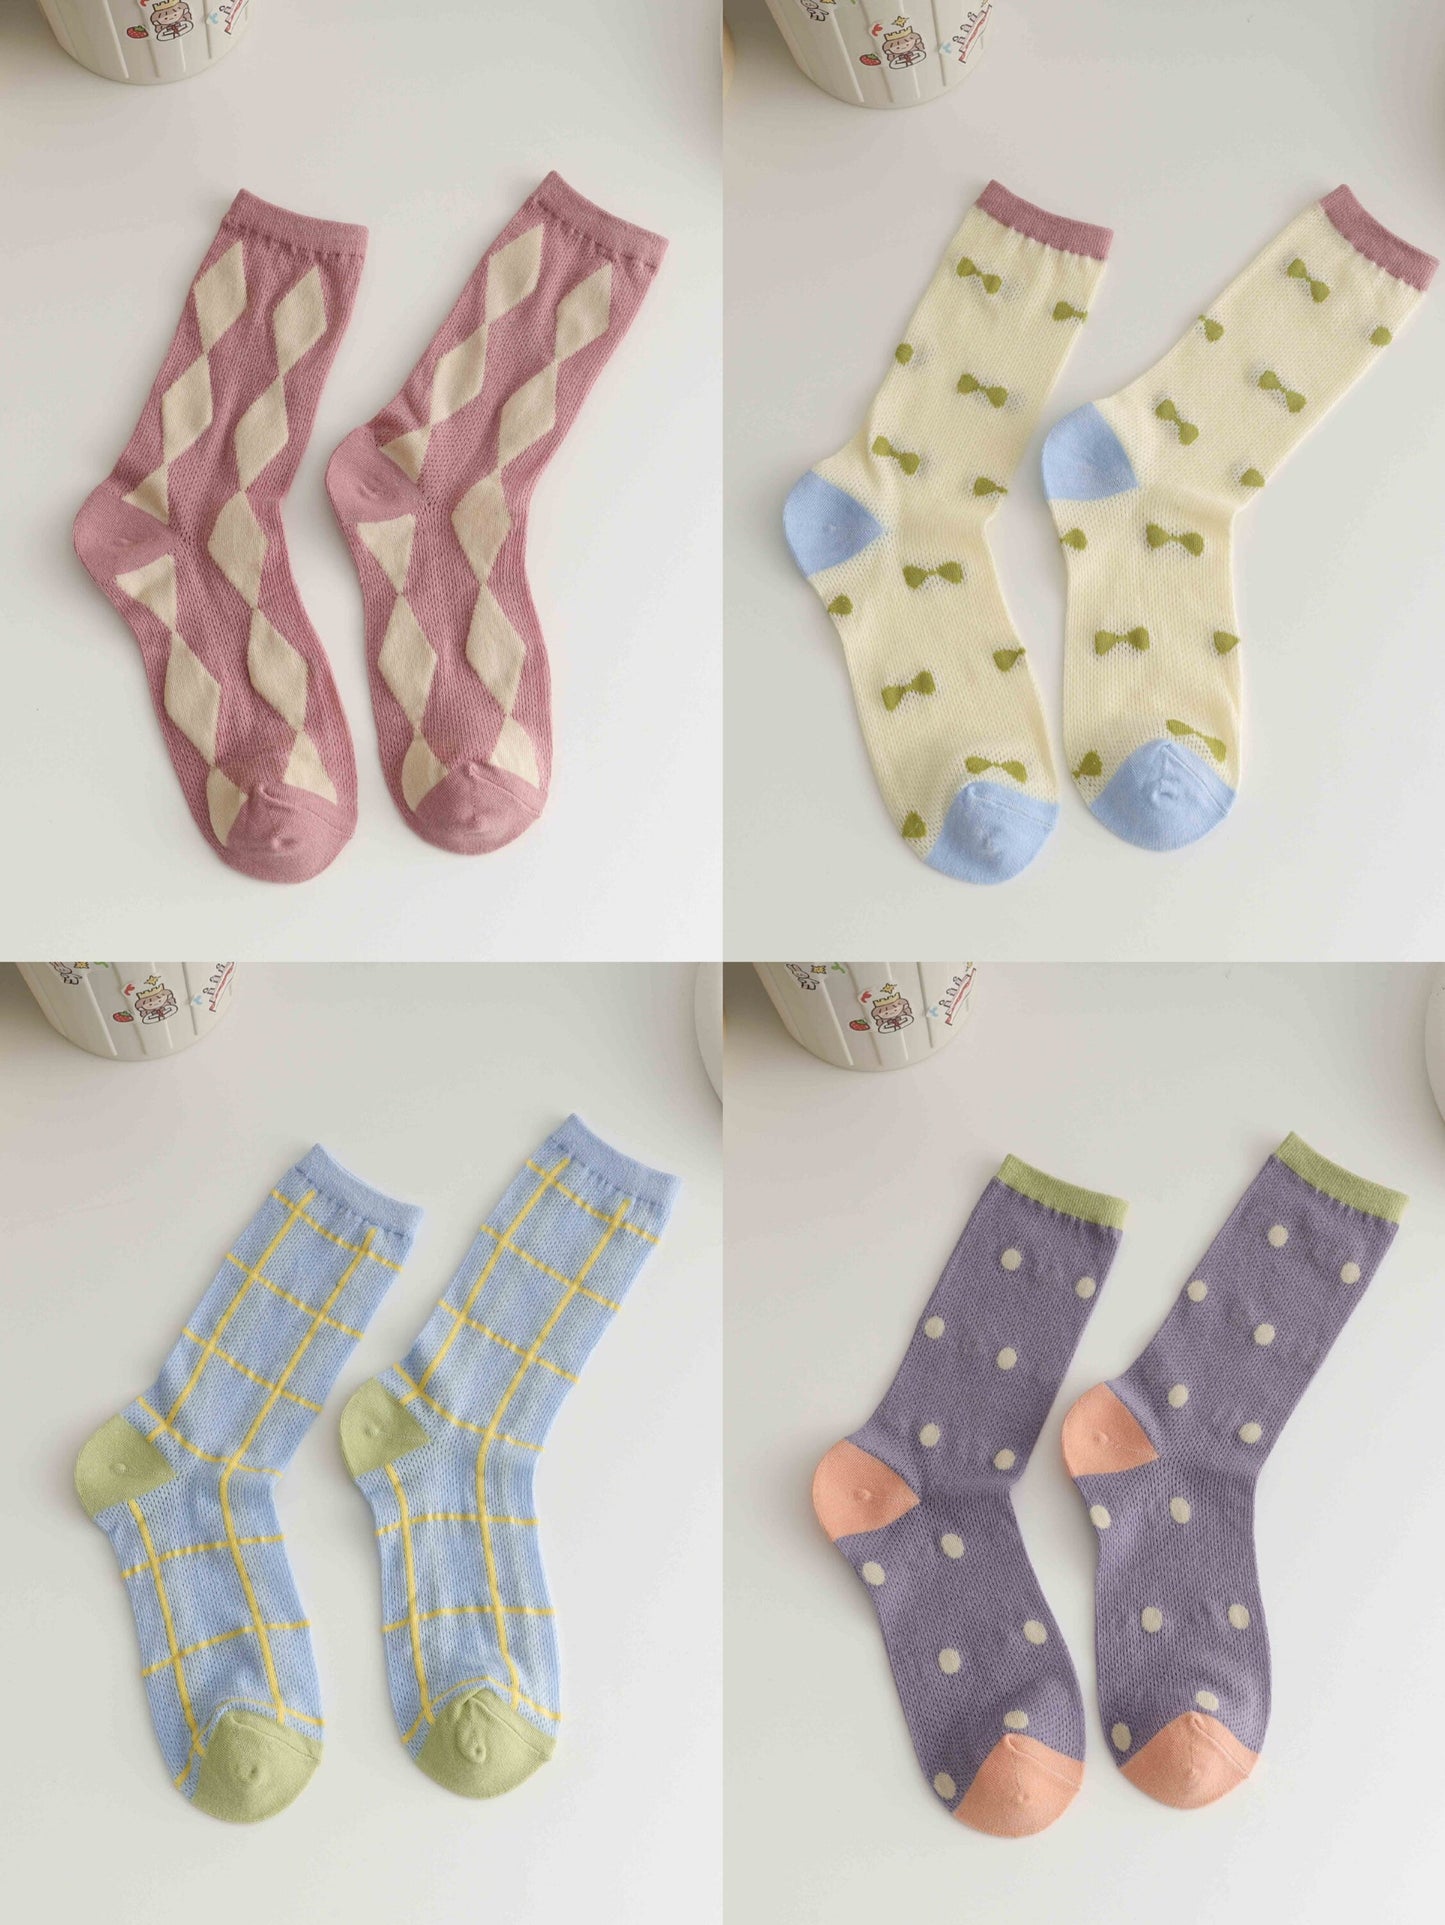 Miss June’s| Women’s light weight cotton blended socks | Cute | Colorful | Summer | Patterned | Gift Idea | Casual | Comfortable |